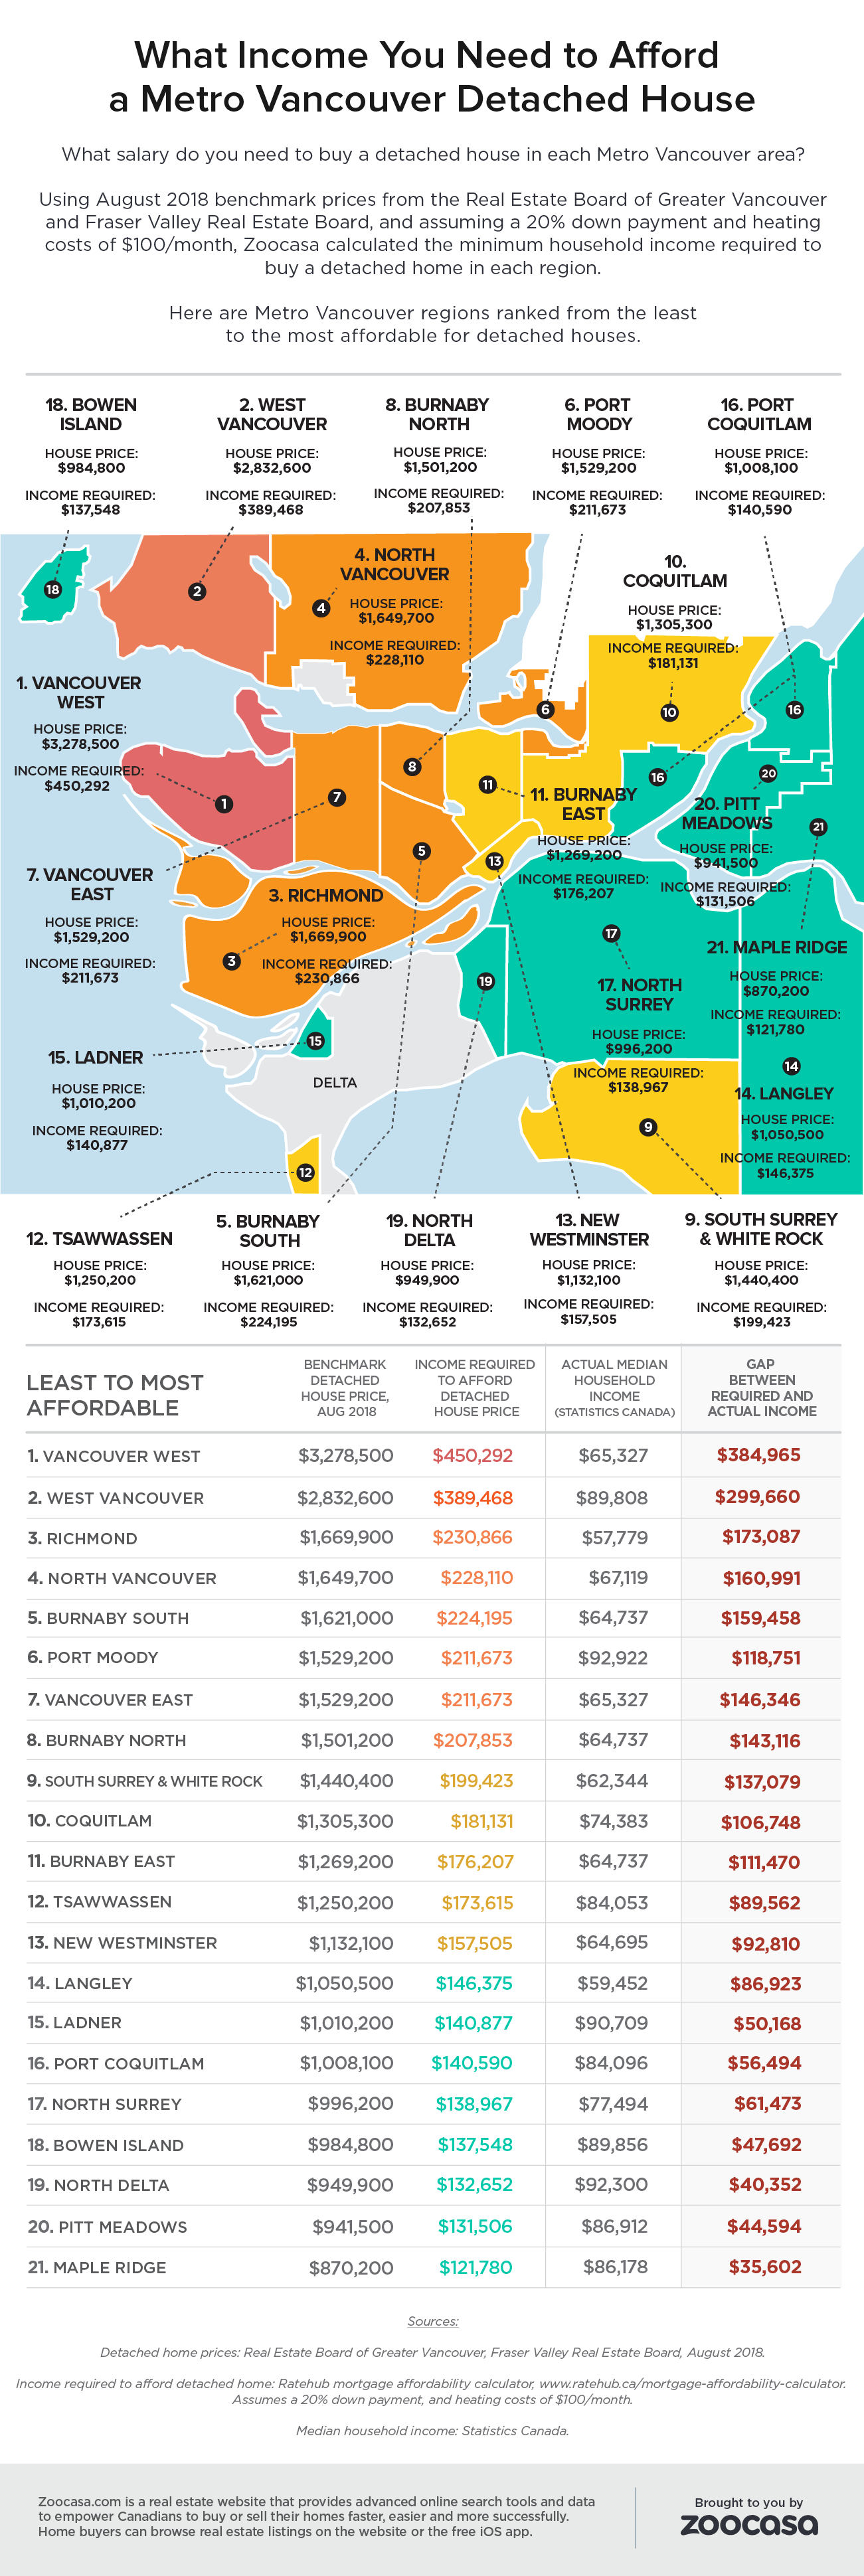 metro-vancouver-housing-affordability-income-gap-detached-house